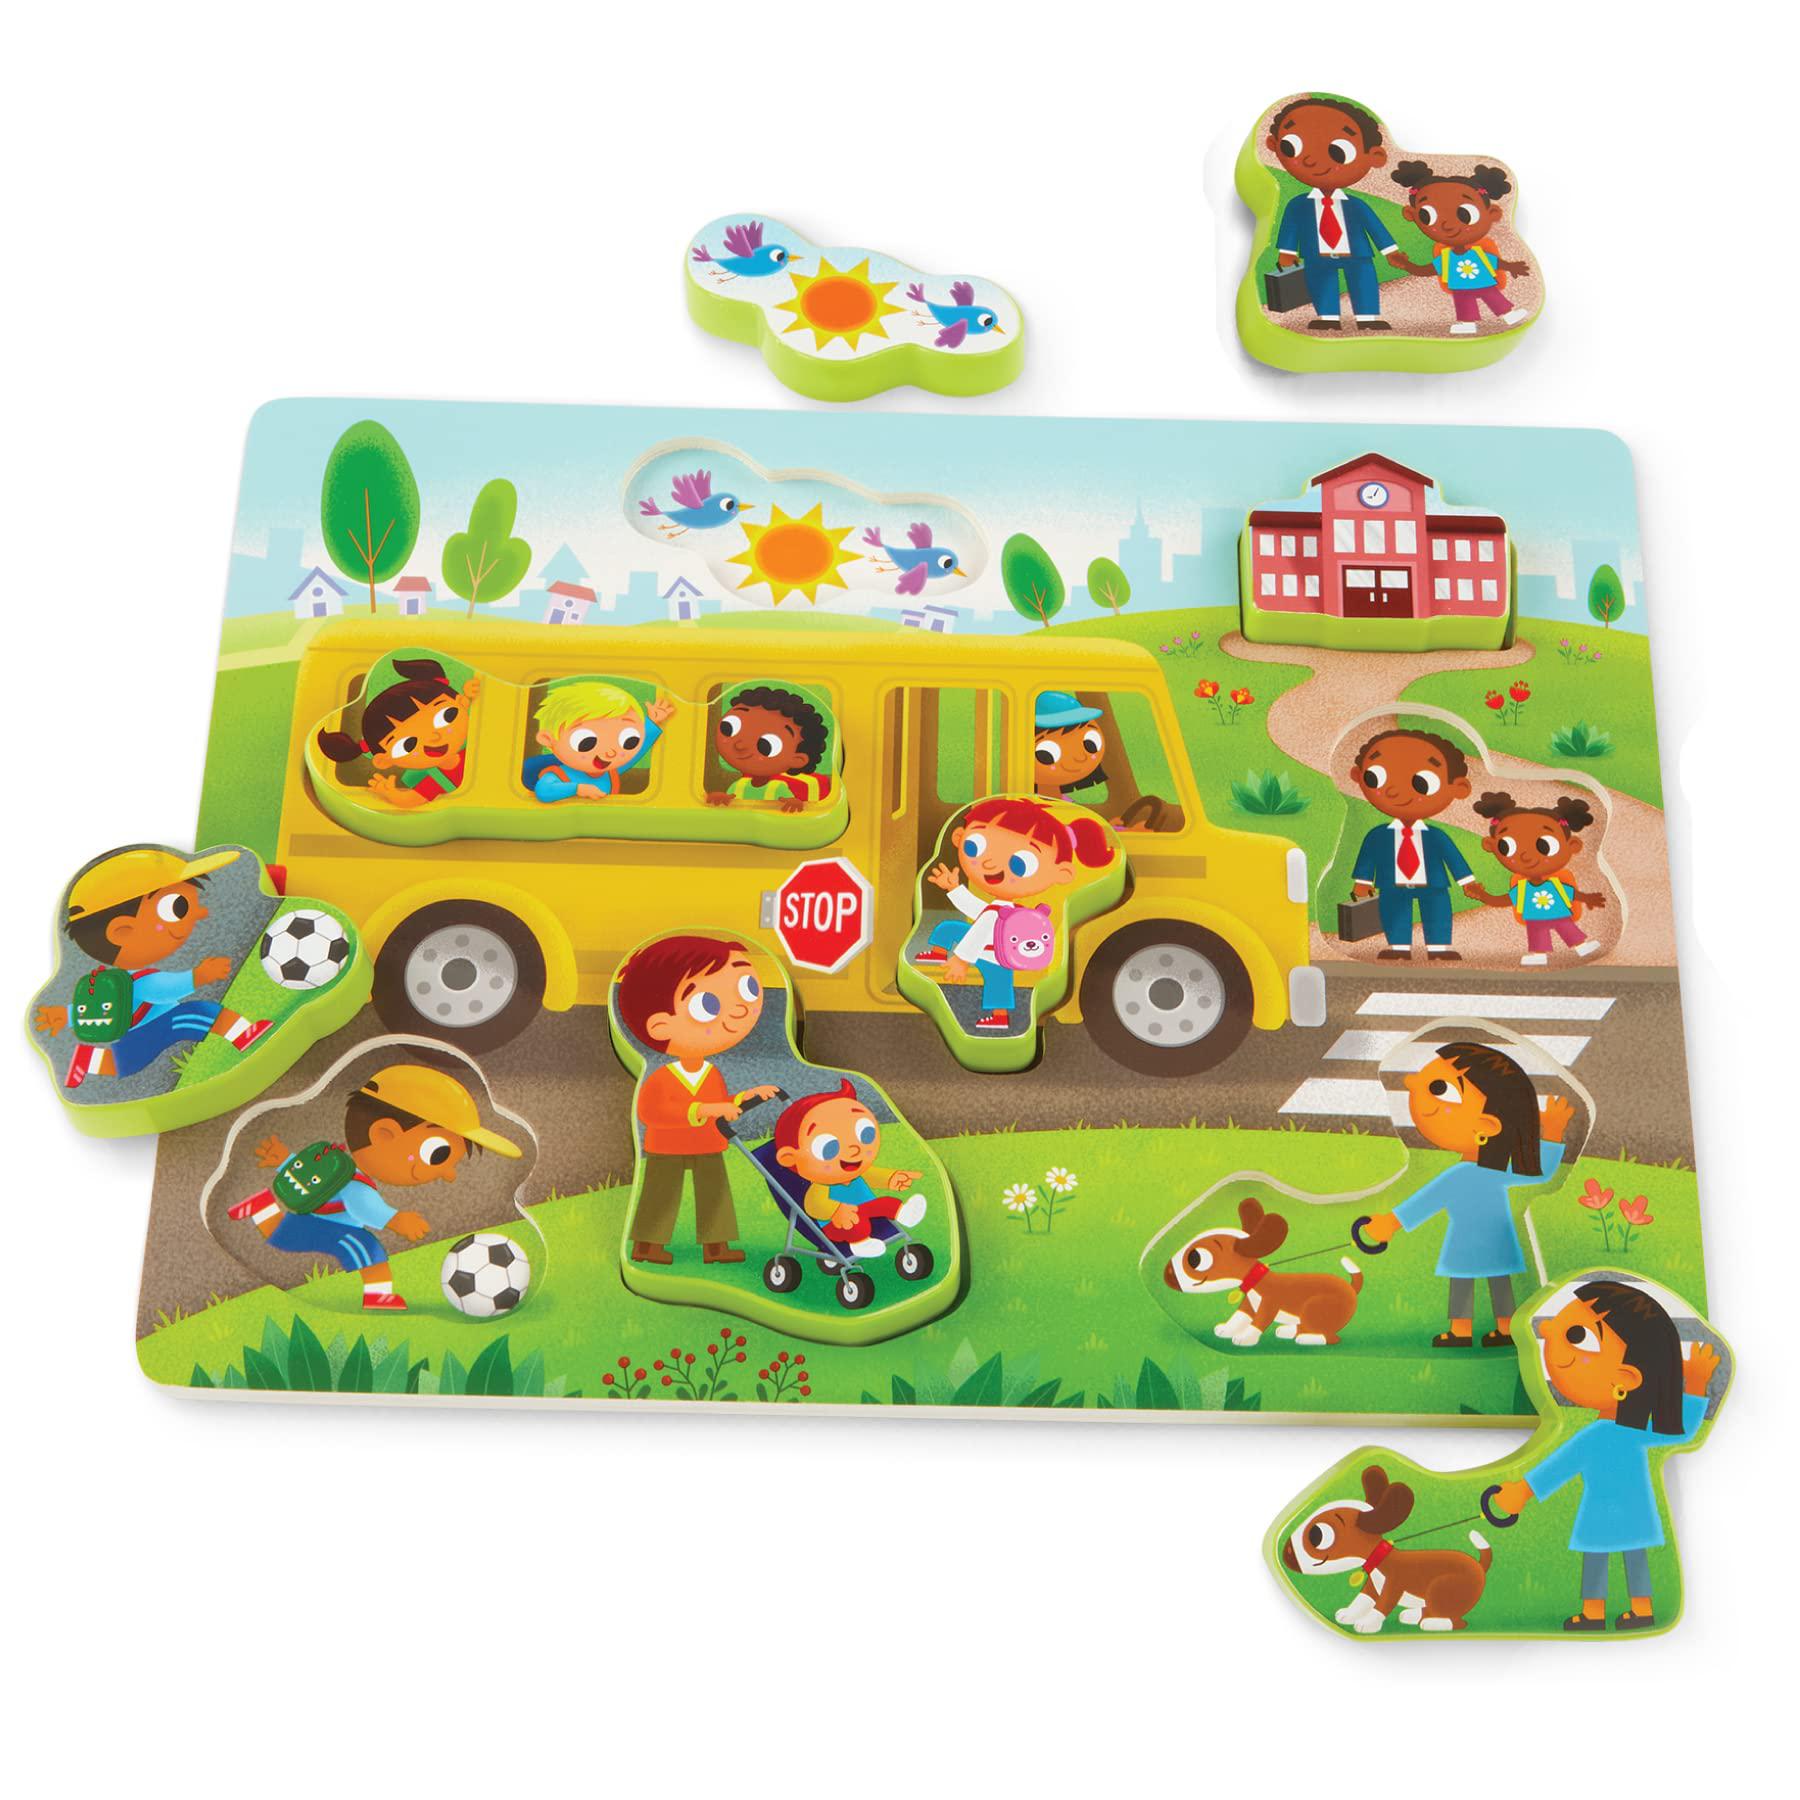 B.toys b. toys - chunky puzzle - puzzle for toddlers, kids - school bus puzzle - school, bus, students - 2 years + - peek & explore 